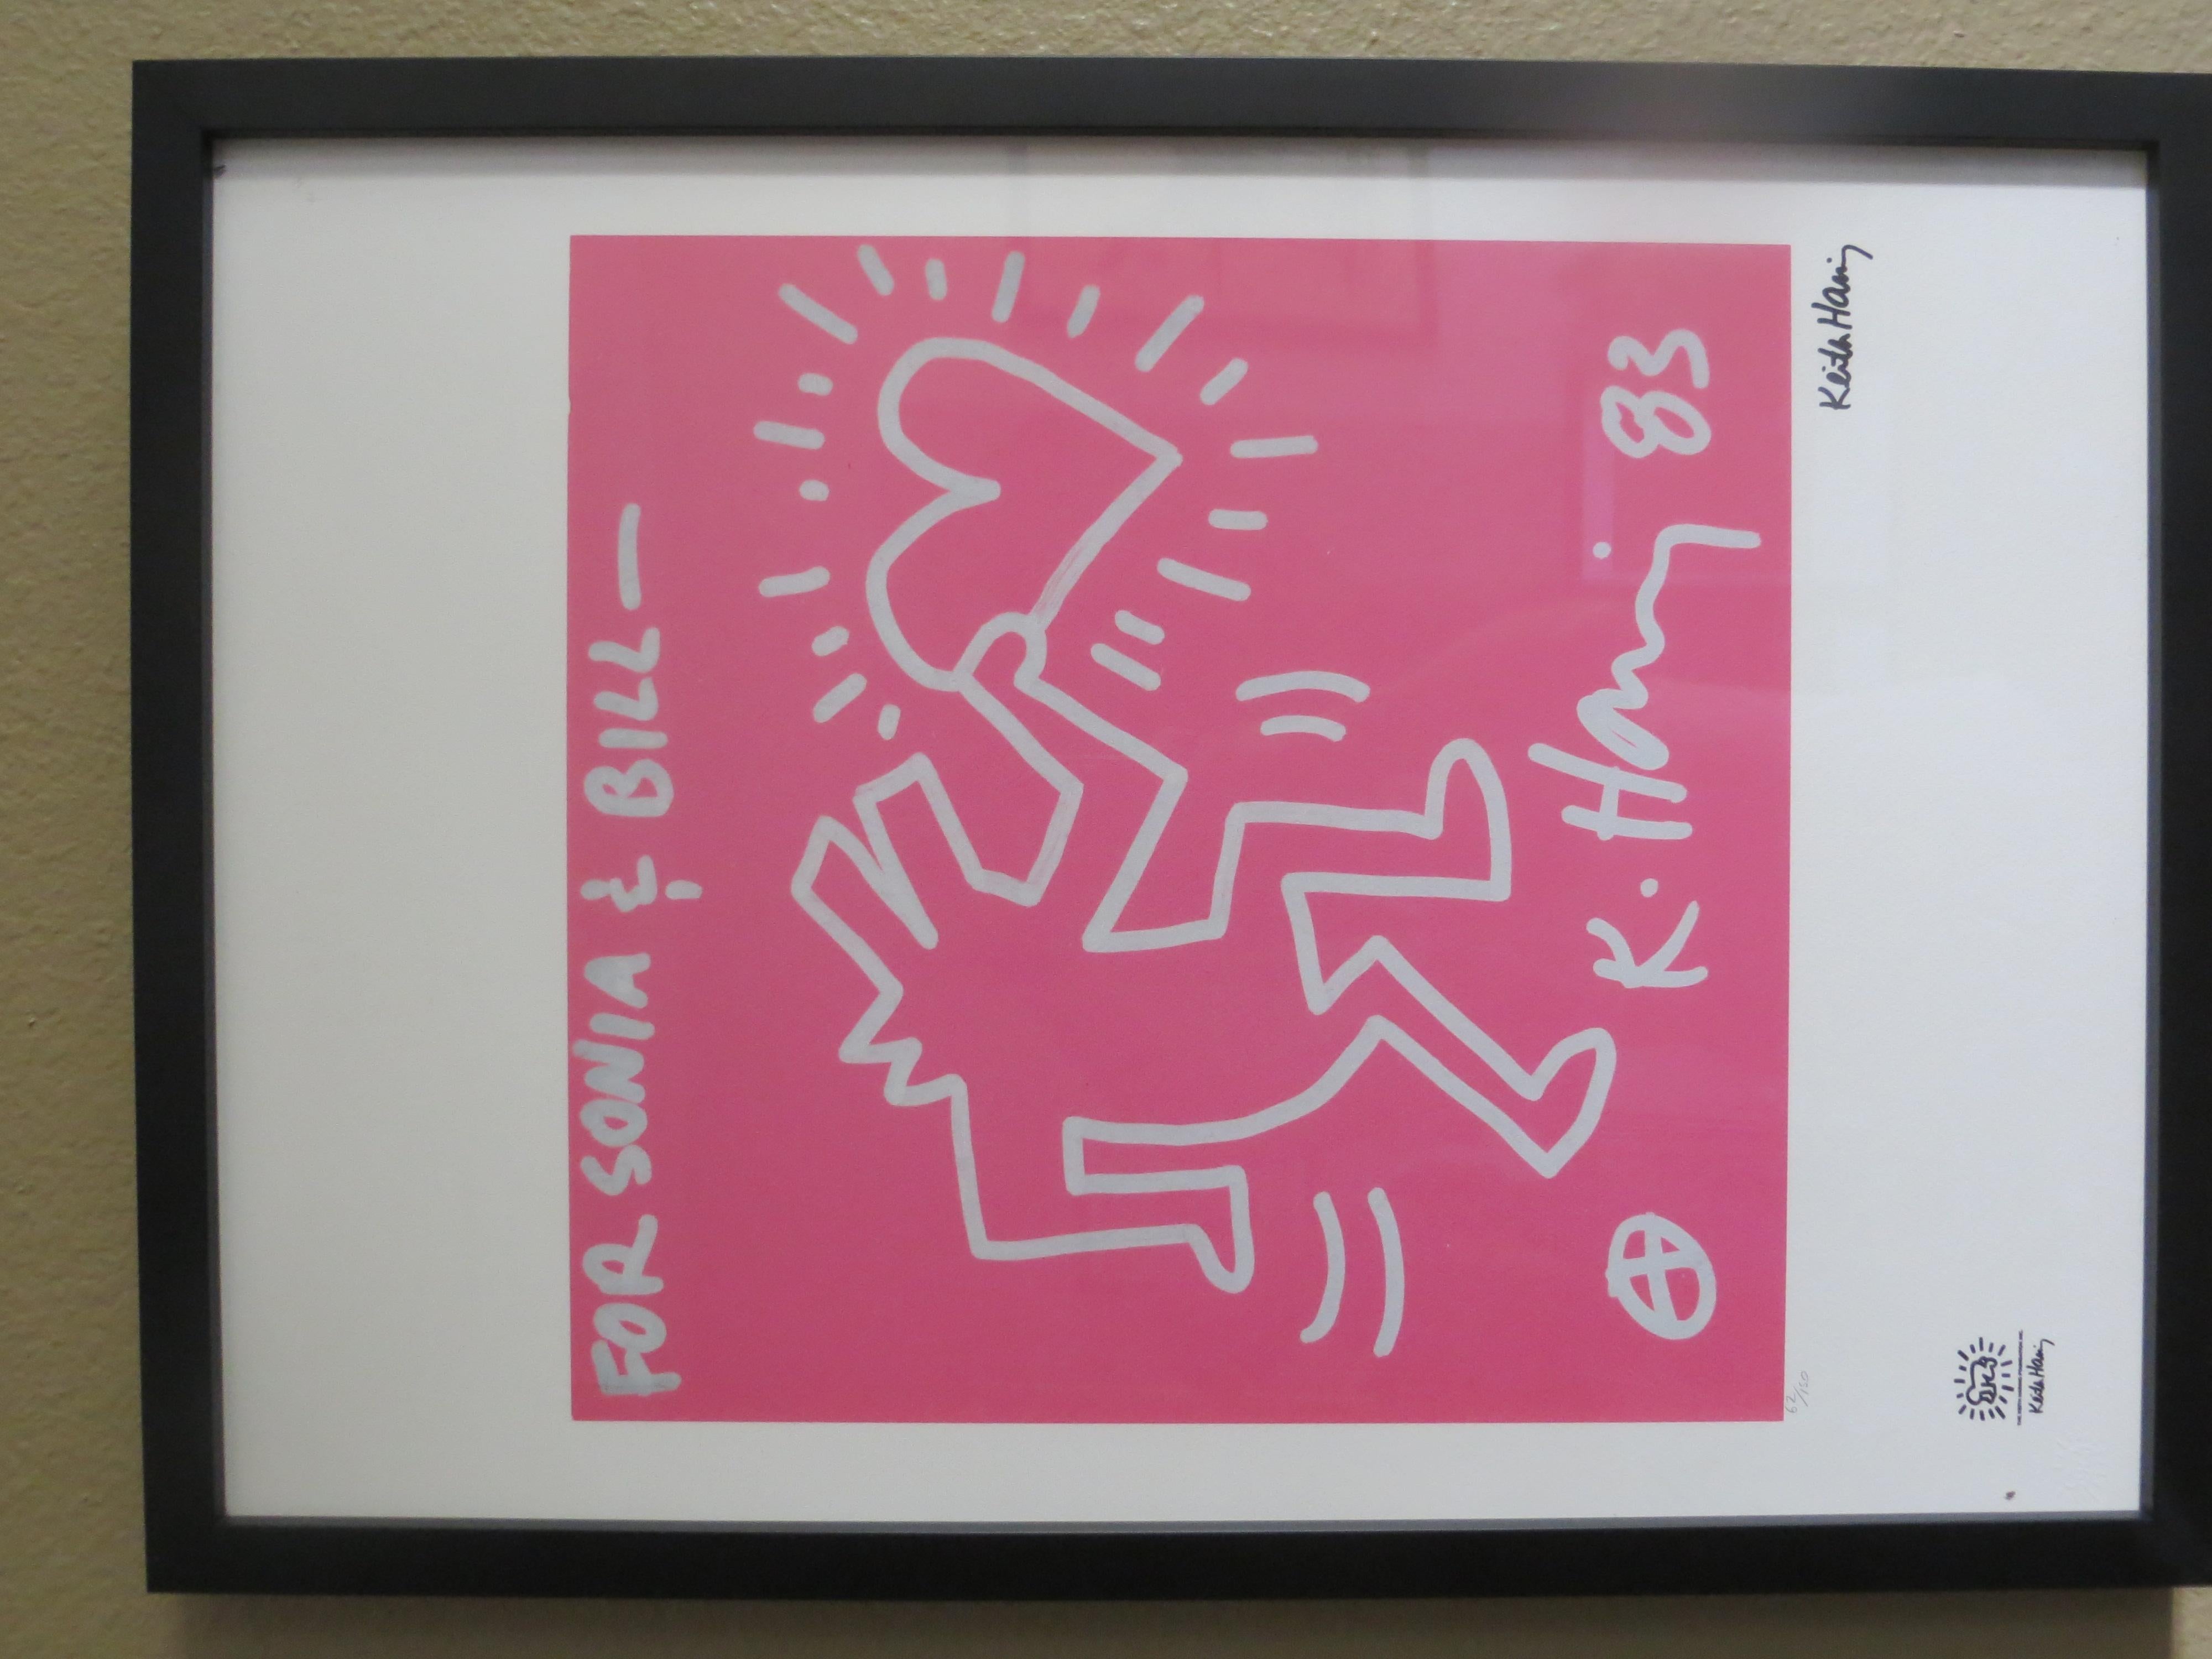   After Keith Haring,  Lithograph, Numbered 62 /150 - Print by (after) Keith Haring